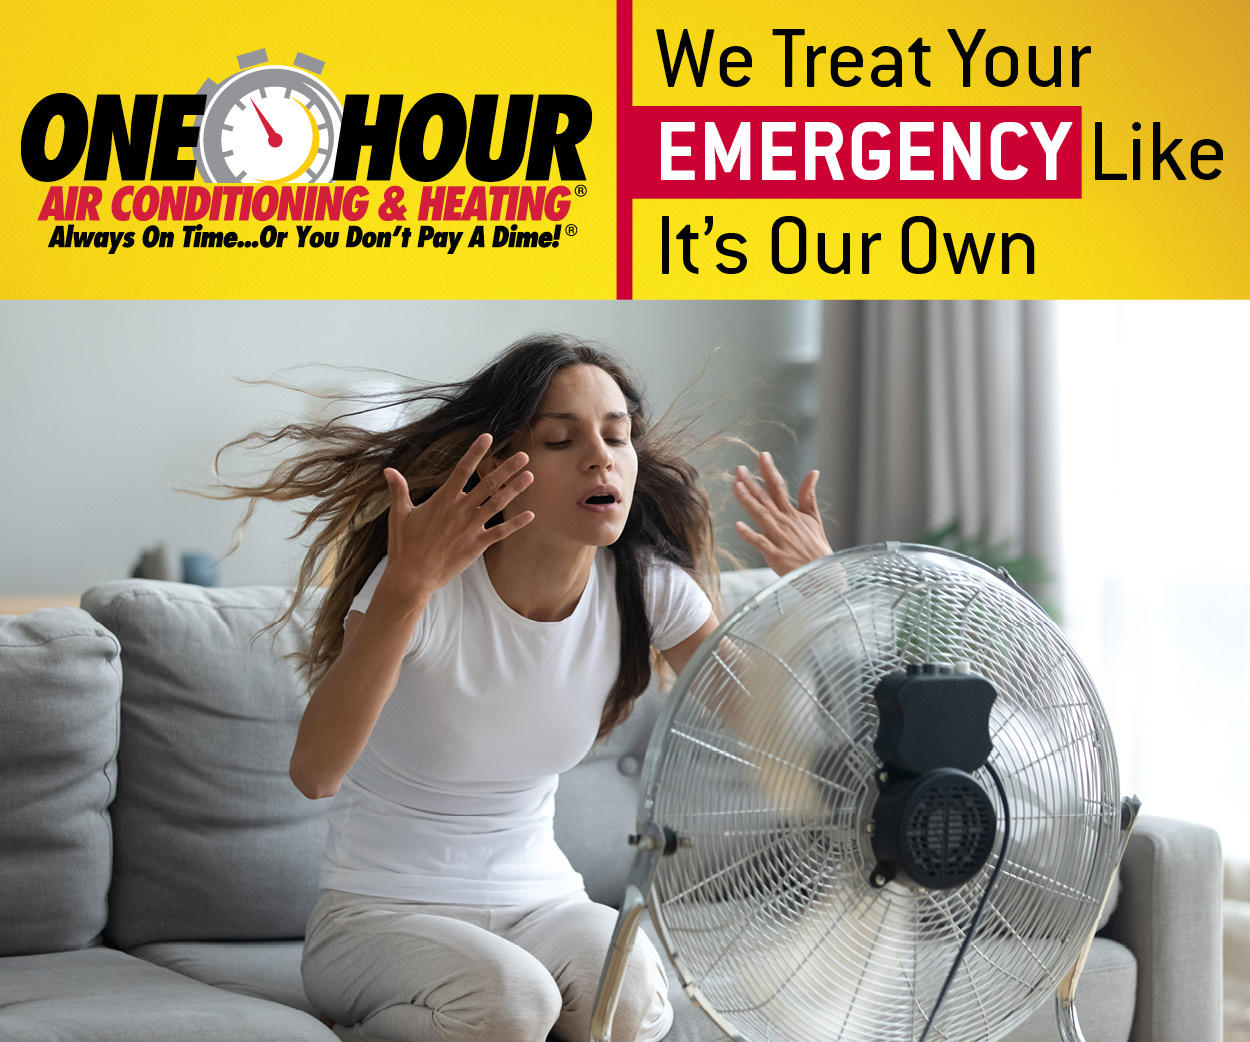 Scott's One Hour Air Conditioning & Heating Photo